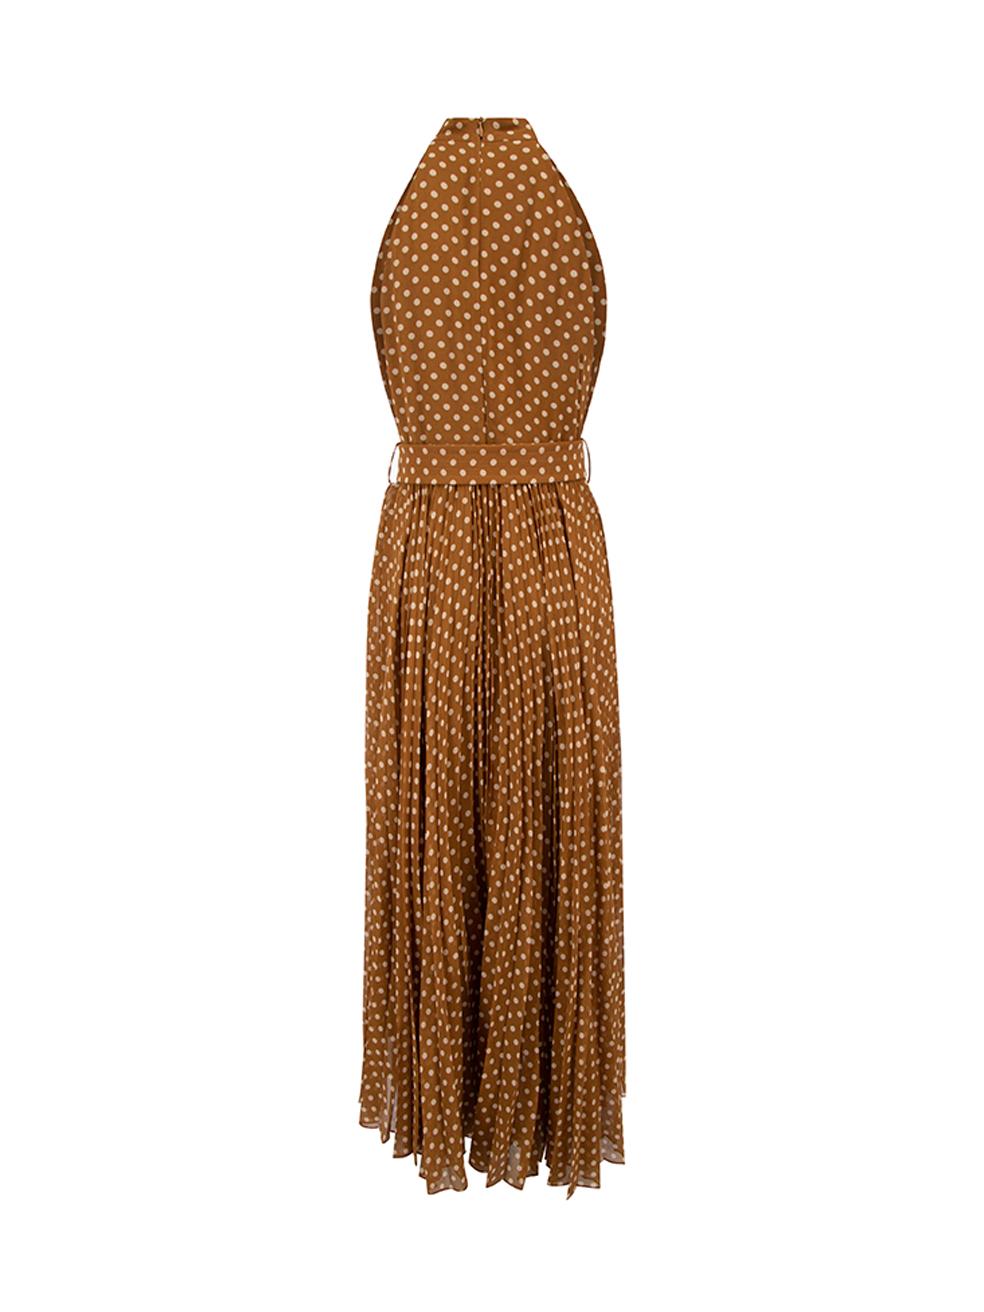 CONDITION is Very good. Hardly any visible wear to dress is evident on this used Zimmermann designer resale item. Details Brown Polyester Maxi dress Polkadot pattern Halterneck Back zip closure Pleated skirt Belted with belt hoops Made in China